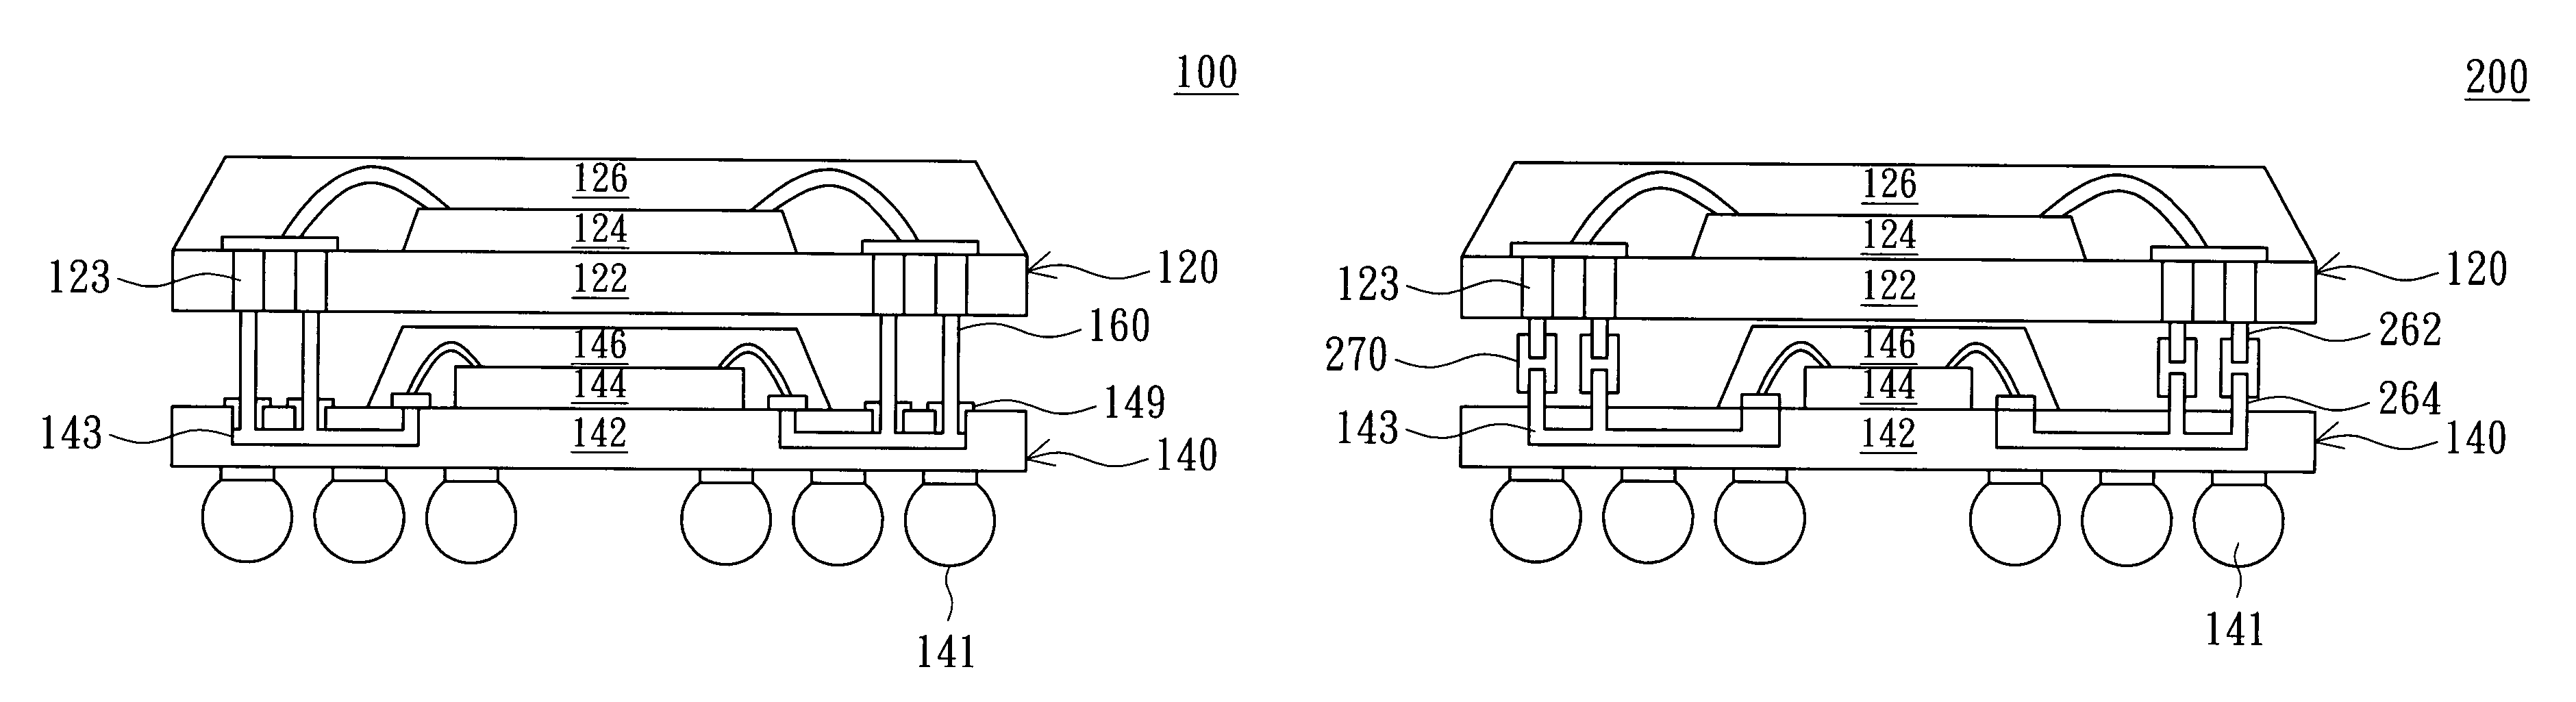 Structure of package on package and method for fabricating the same